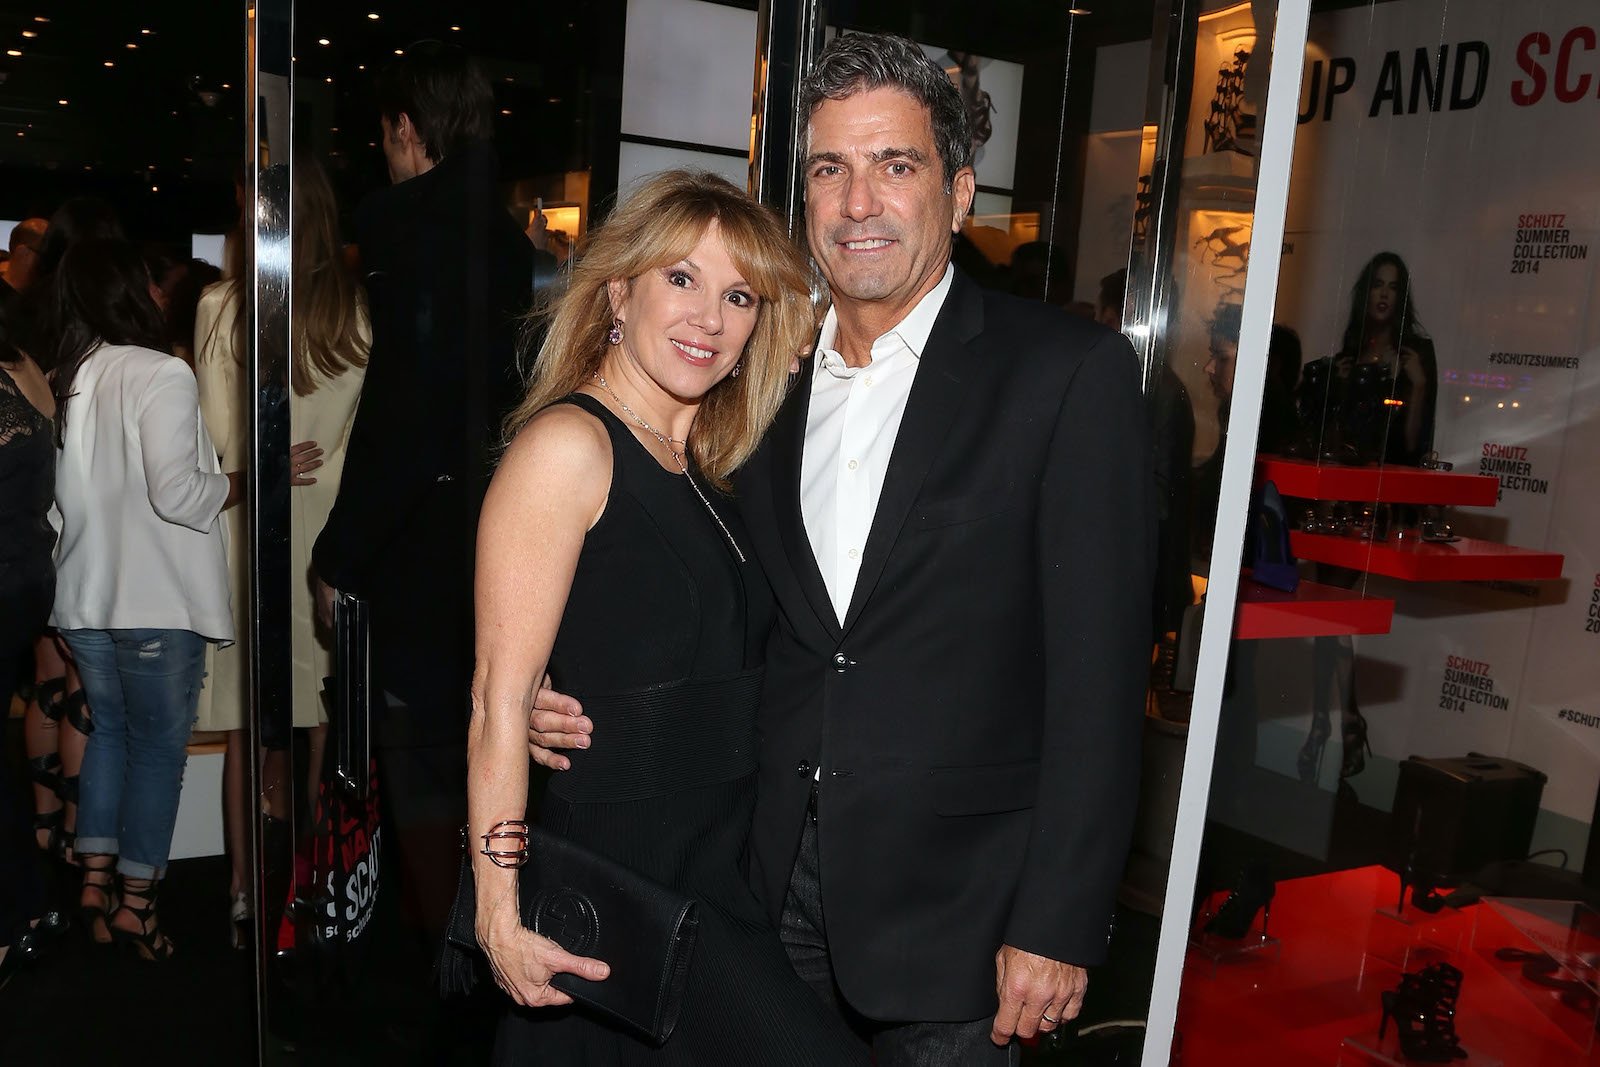 Ramona Singer Blames ‘RHONY’ for Her Divorce, Kari Wells From ‘Married to Medicine’ Says Reality TV Can Kill Relationships